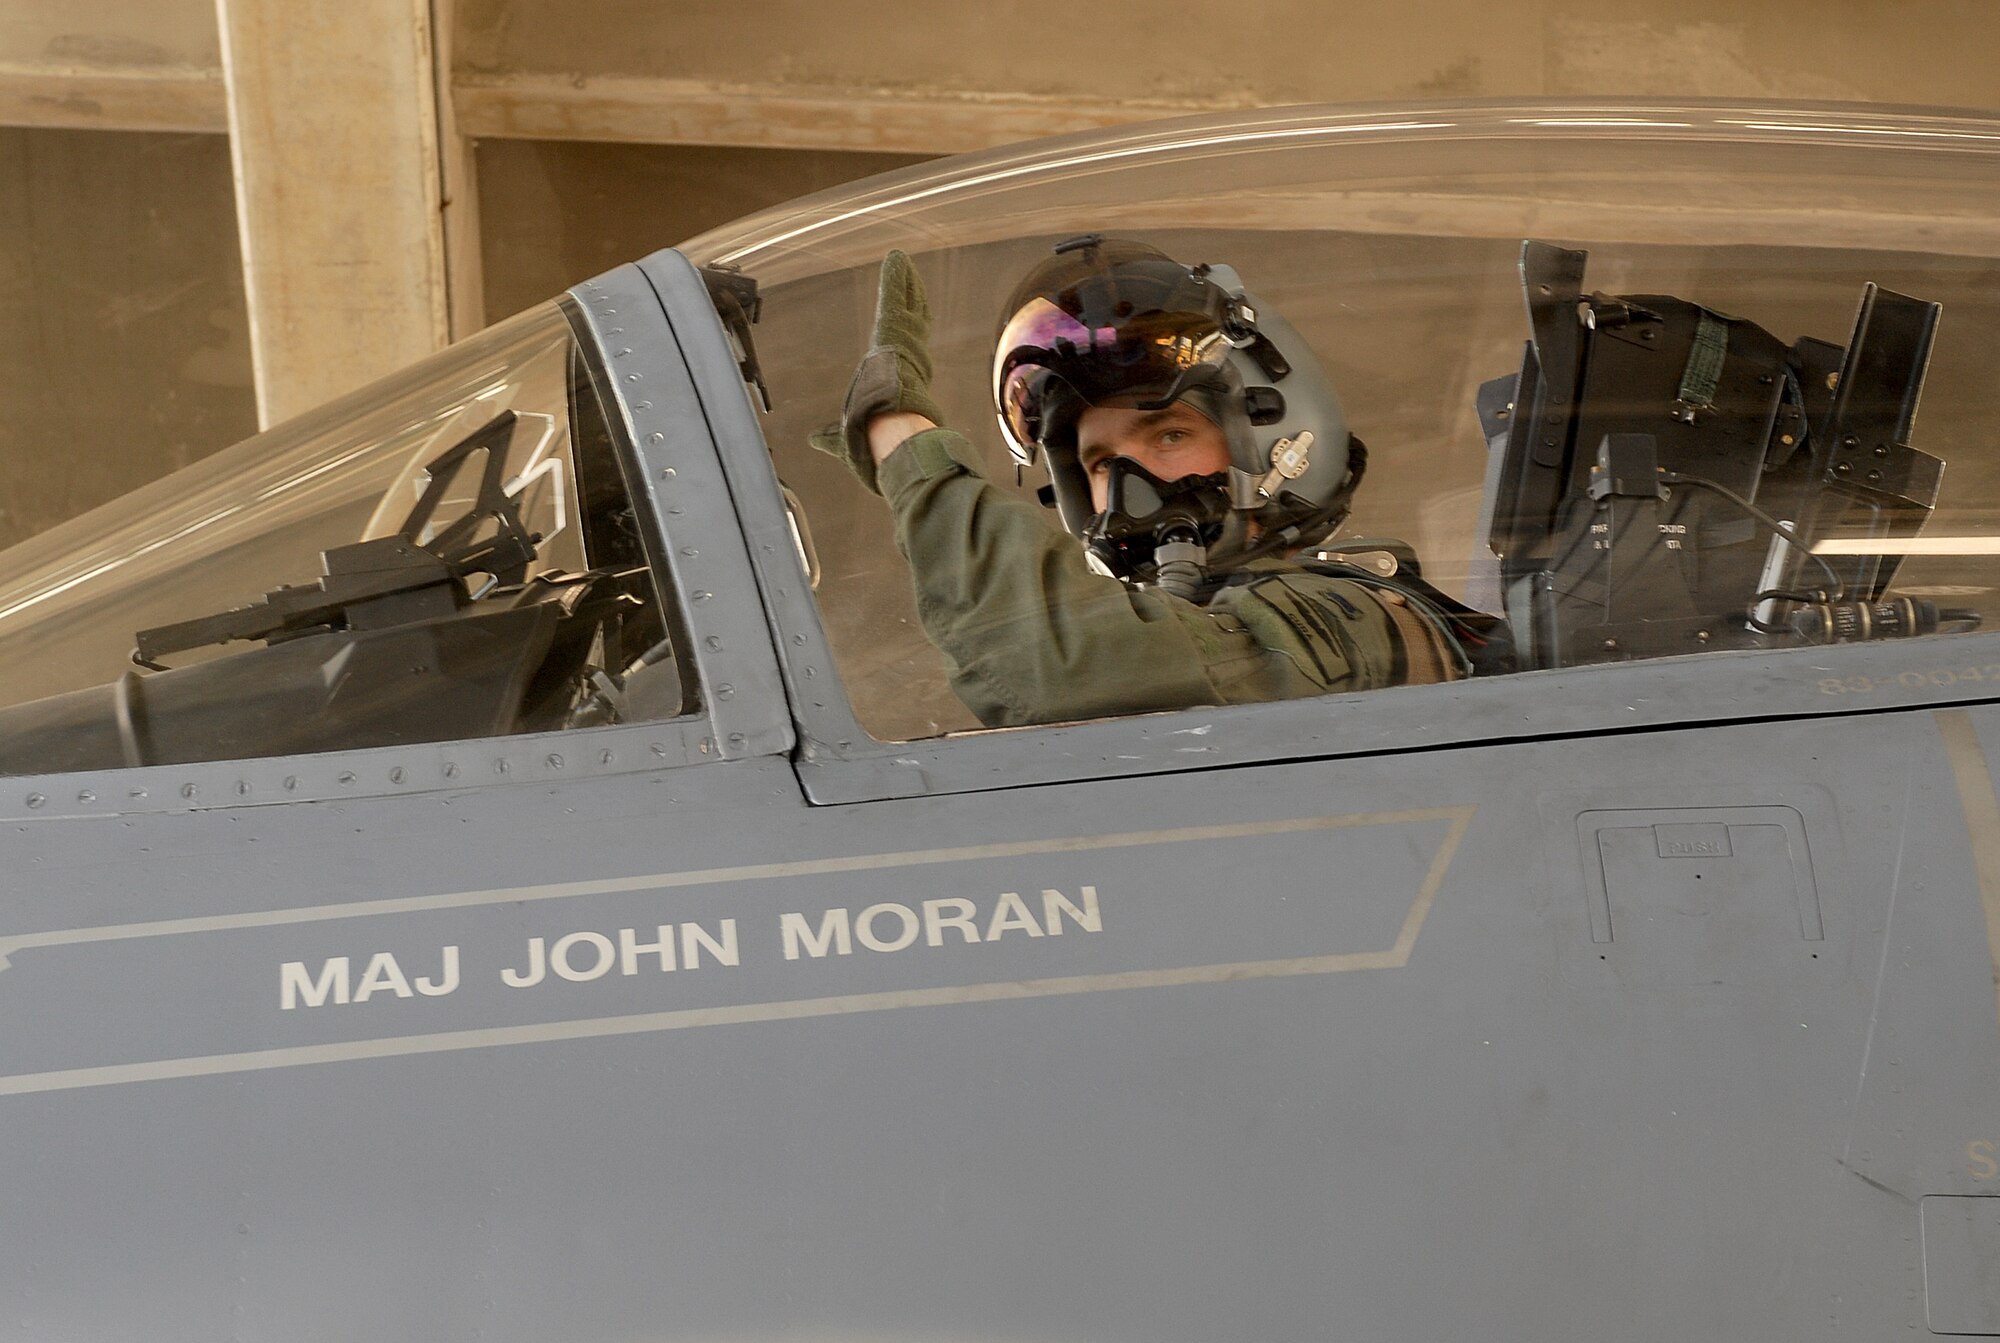 First Lt. John Fischer waves as he begins to taxi his F-15C Eagle at Kadena Air Base, Japan, Aug. 5, 2007, prior to takeoff en route to Guam in support of Exercise Valiant Shield.  More than 400 base Airmen and F-15Cs, KC-135R Stratotankers and E-3 Airborne Warning and Control System aircraft are participating in the weeklong Pacific Command joint exercise which focuses on integrated joint training to enable real-world proficiency in sustaining forces and detecting, locating, tracking and engaging units at sea, in the air, on land, and cyberspace in response to a range of mission areas. Lieutenant Fischer is a 44th Fighter Squadron pilot. 
U.S. Air Force photo/Airman 1st Class Kelly Timney